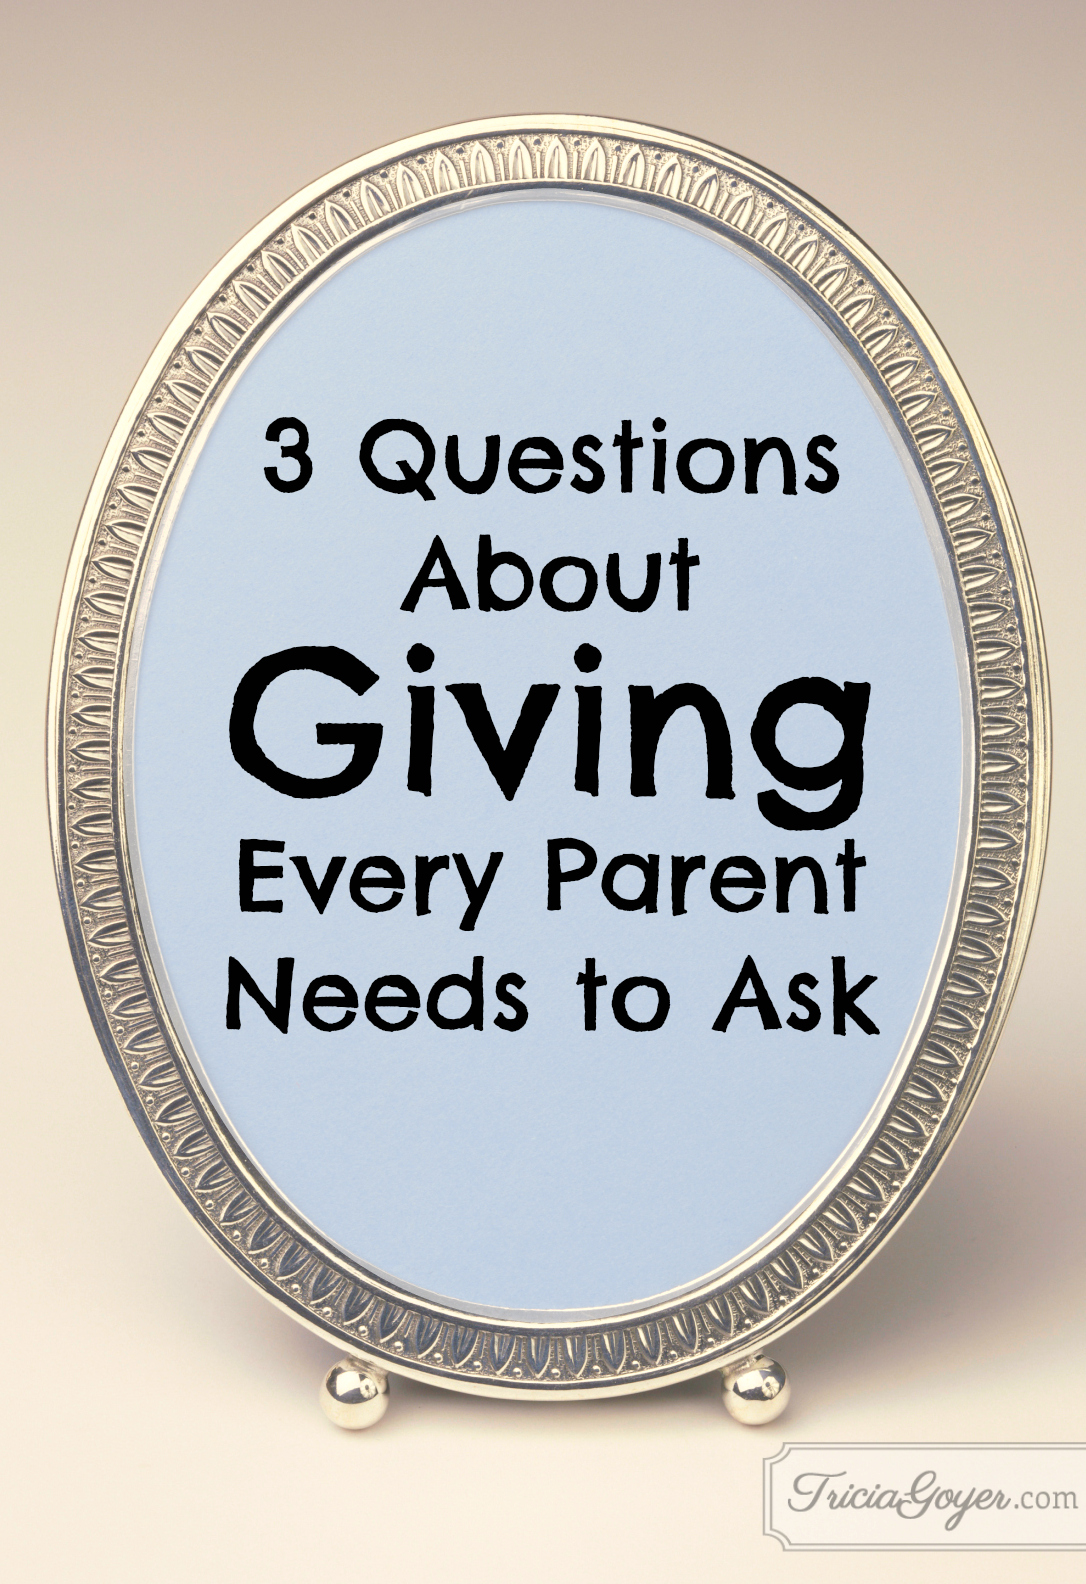 3 Questions About Giving Every Parent Needs to Ask